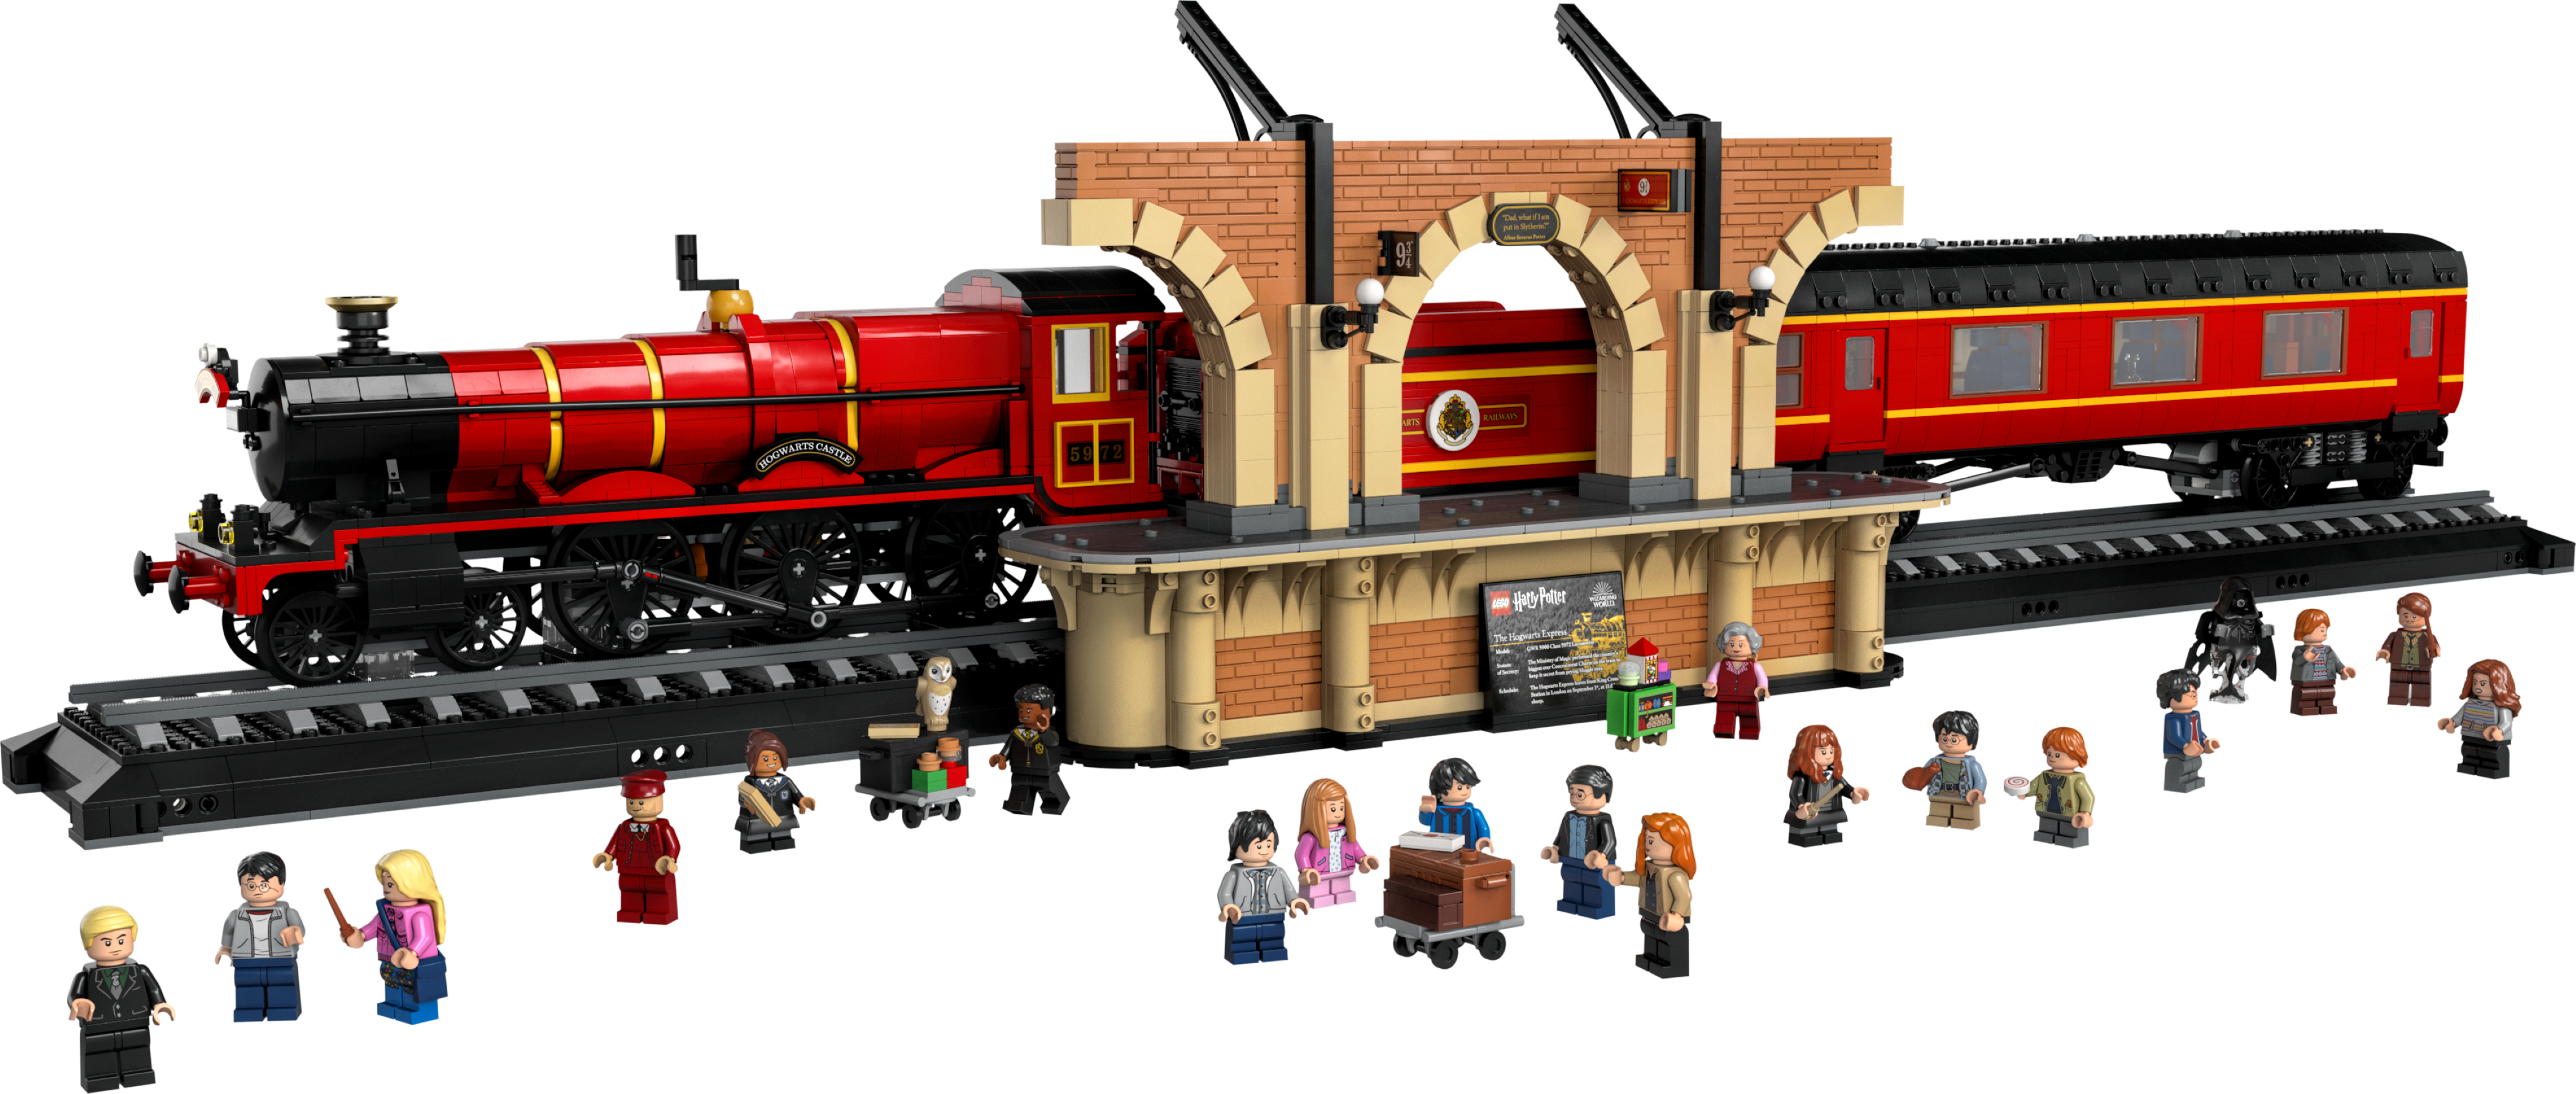 slope puberty play piano Hogwarts Express™ – Collectors' Edition 76405 | Harry Potter™ | Buy online  at the Official LEGO® Shop US